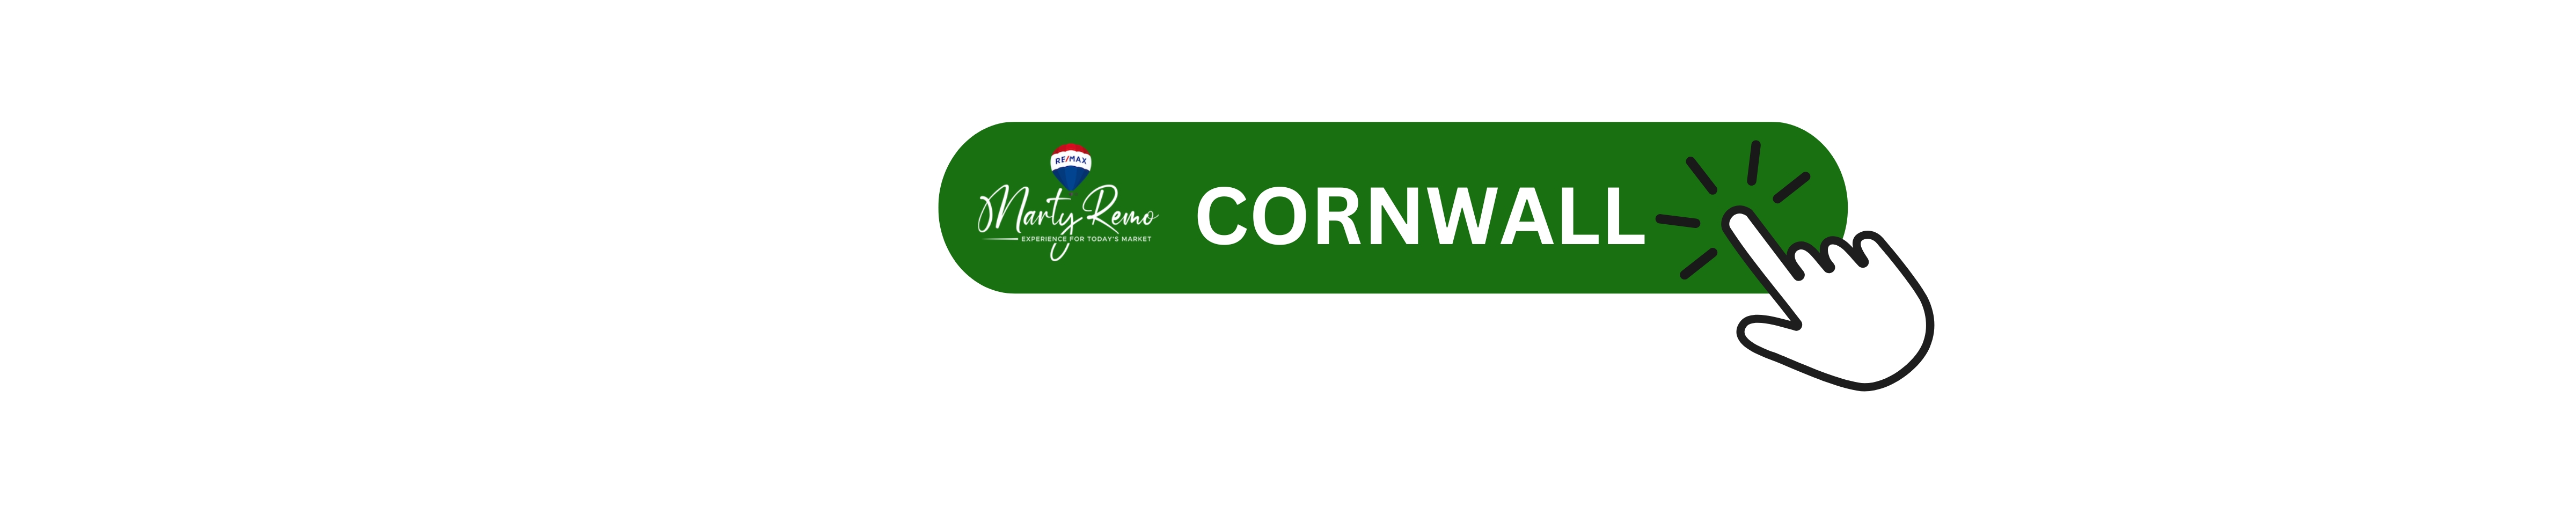 Latest Homes For Sale in Cornwall